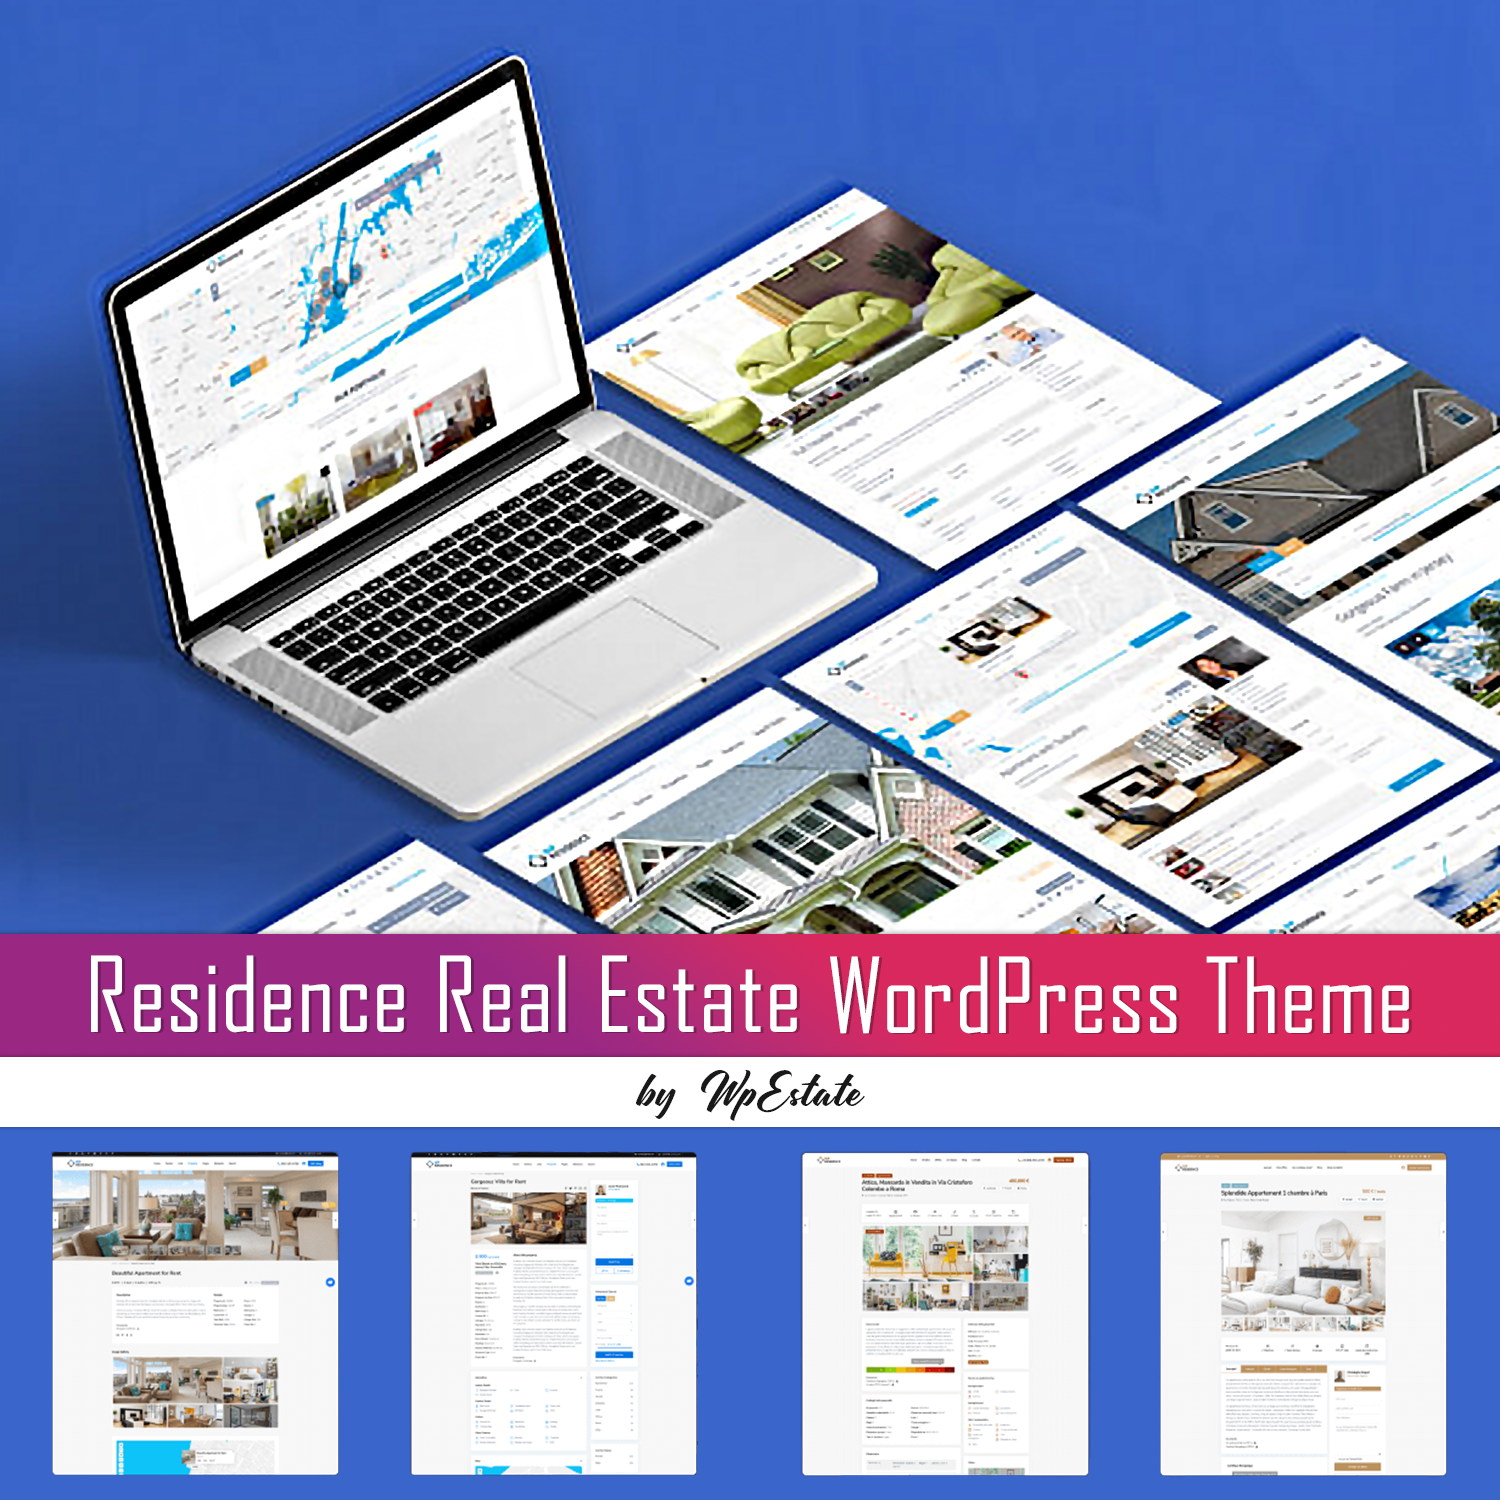 Images with residence real estate wordpress theme.